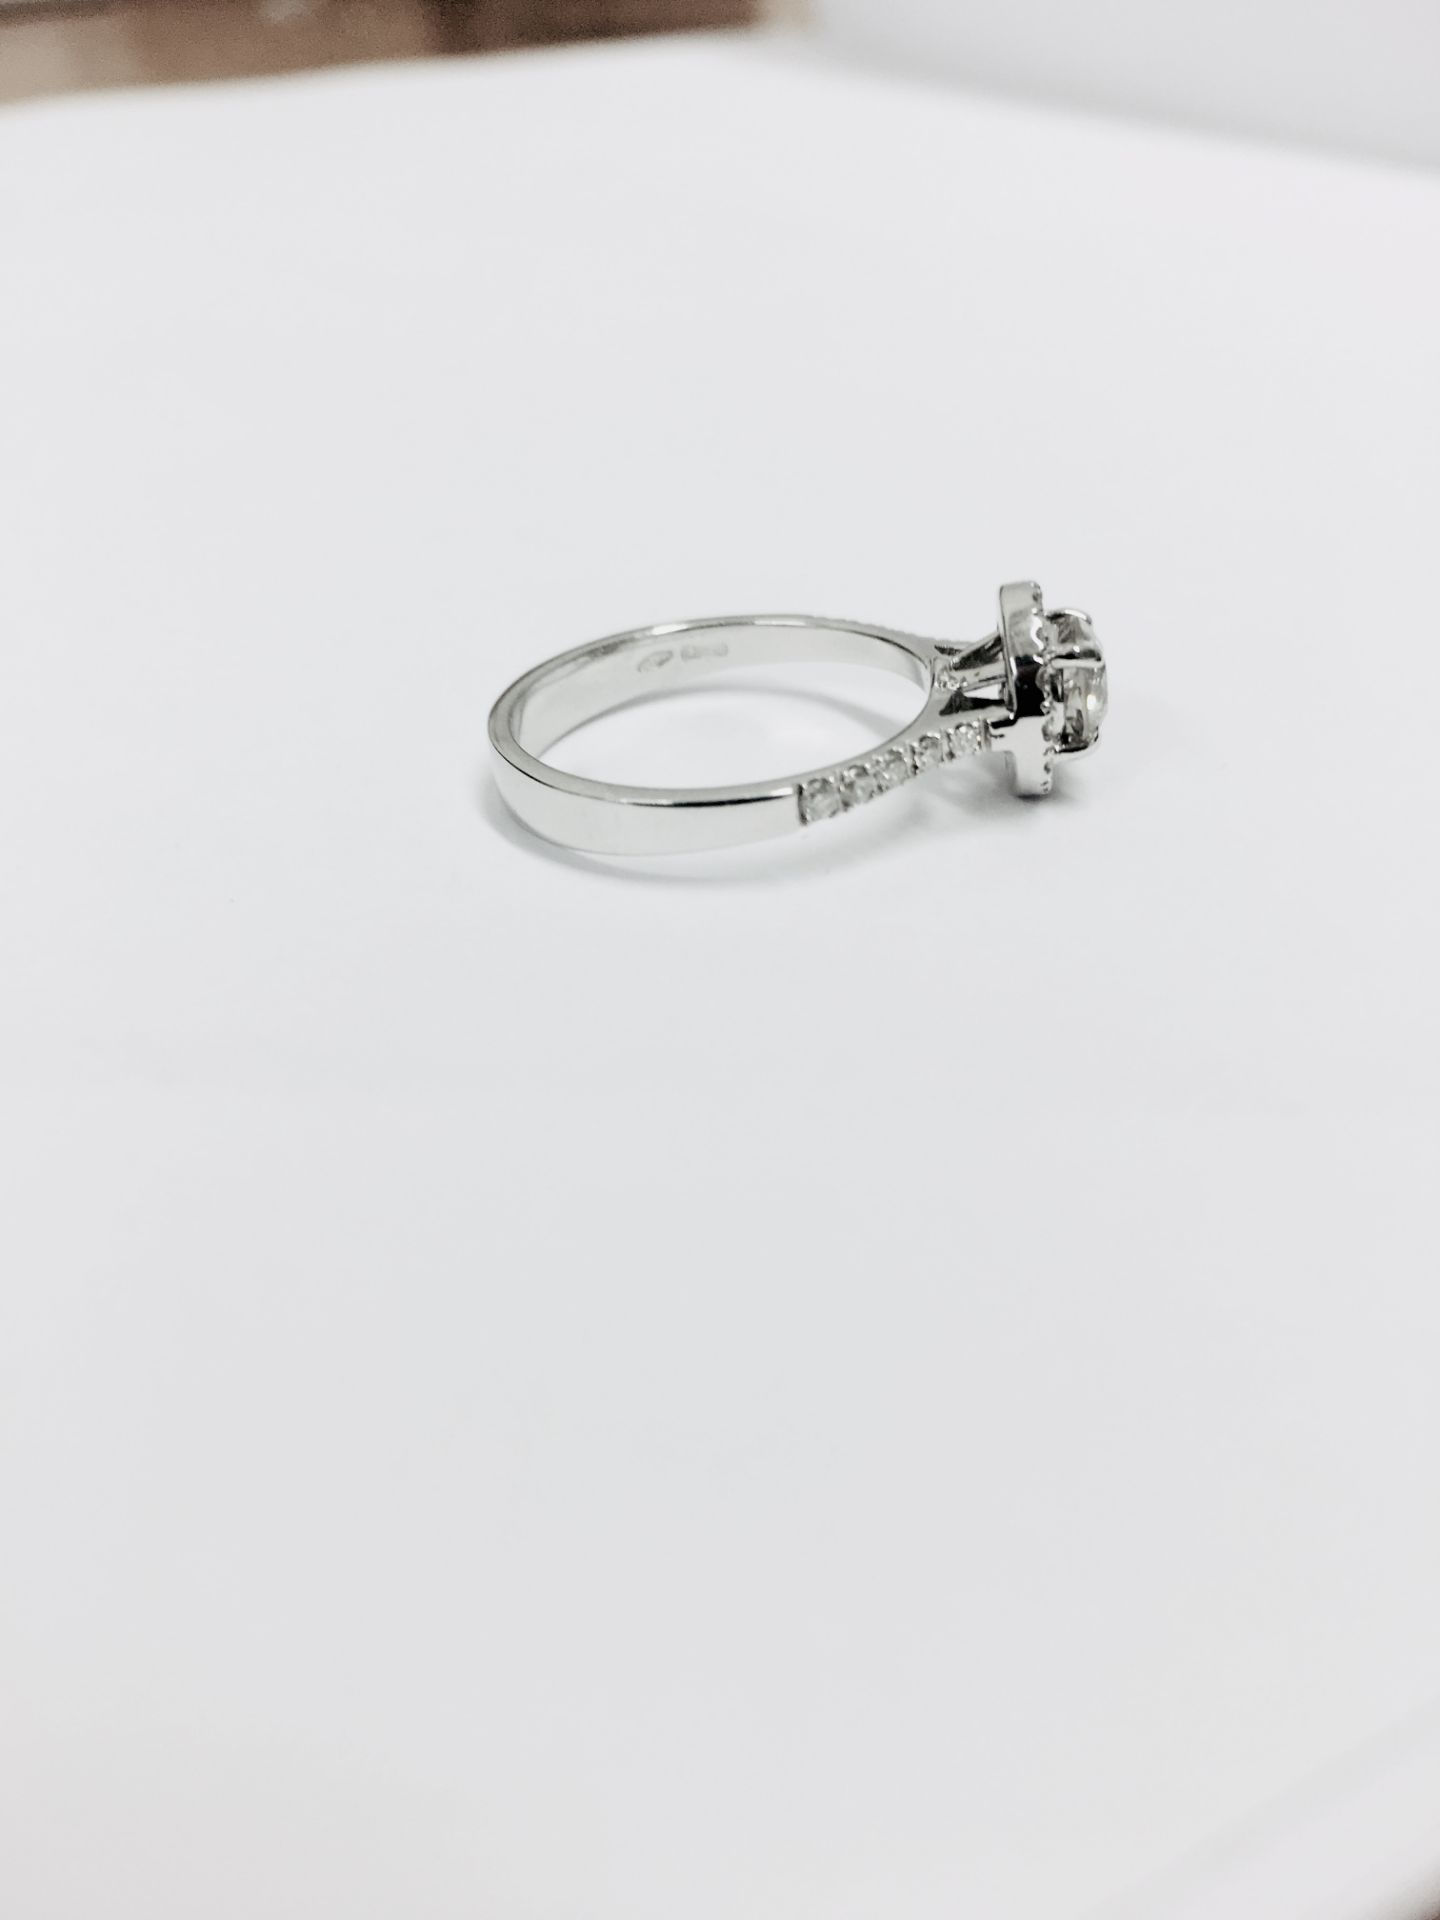 0.40ct diamond set solitaire ring set in 18ct gold. Centre stone J colour, si3 clarity with a halo - Image 4 of 6